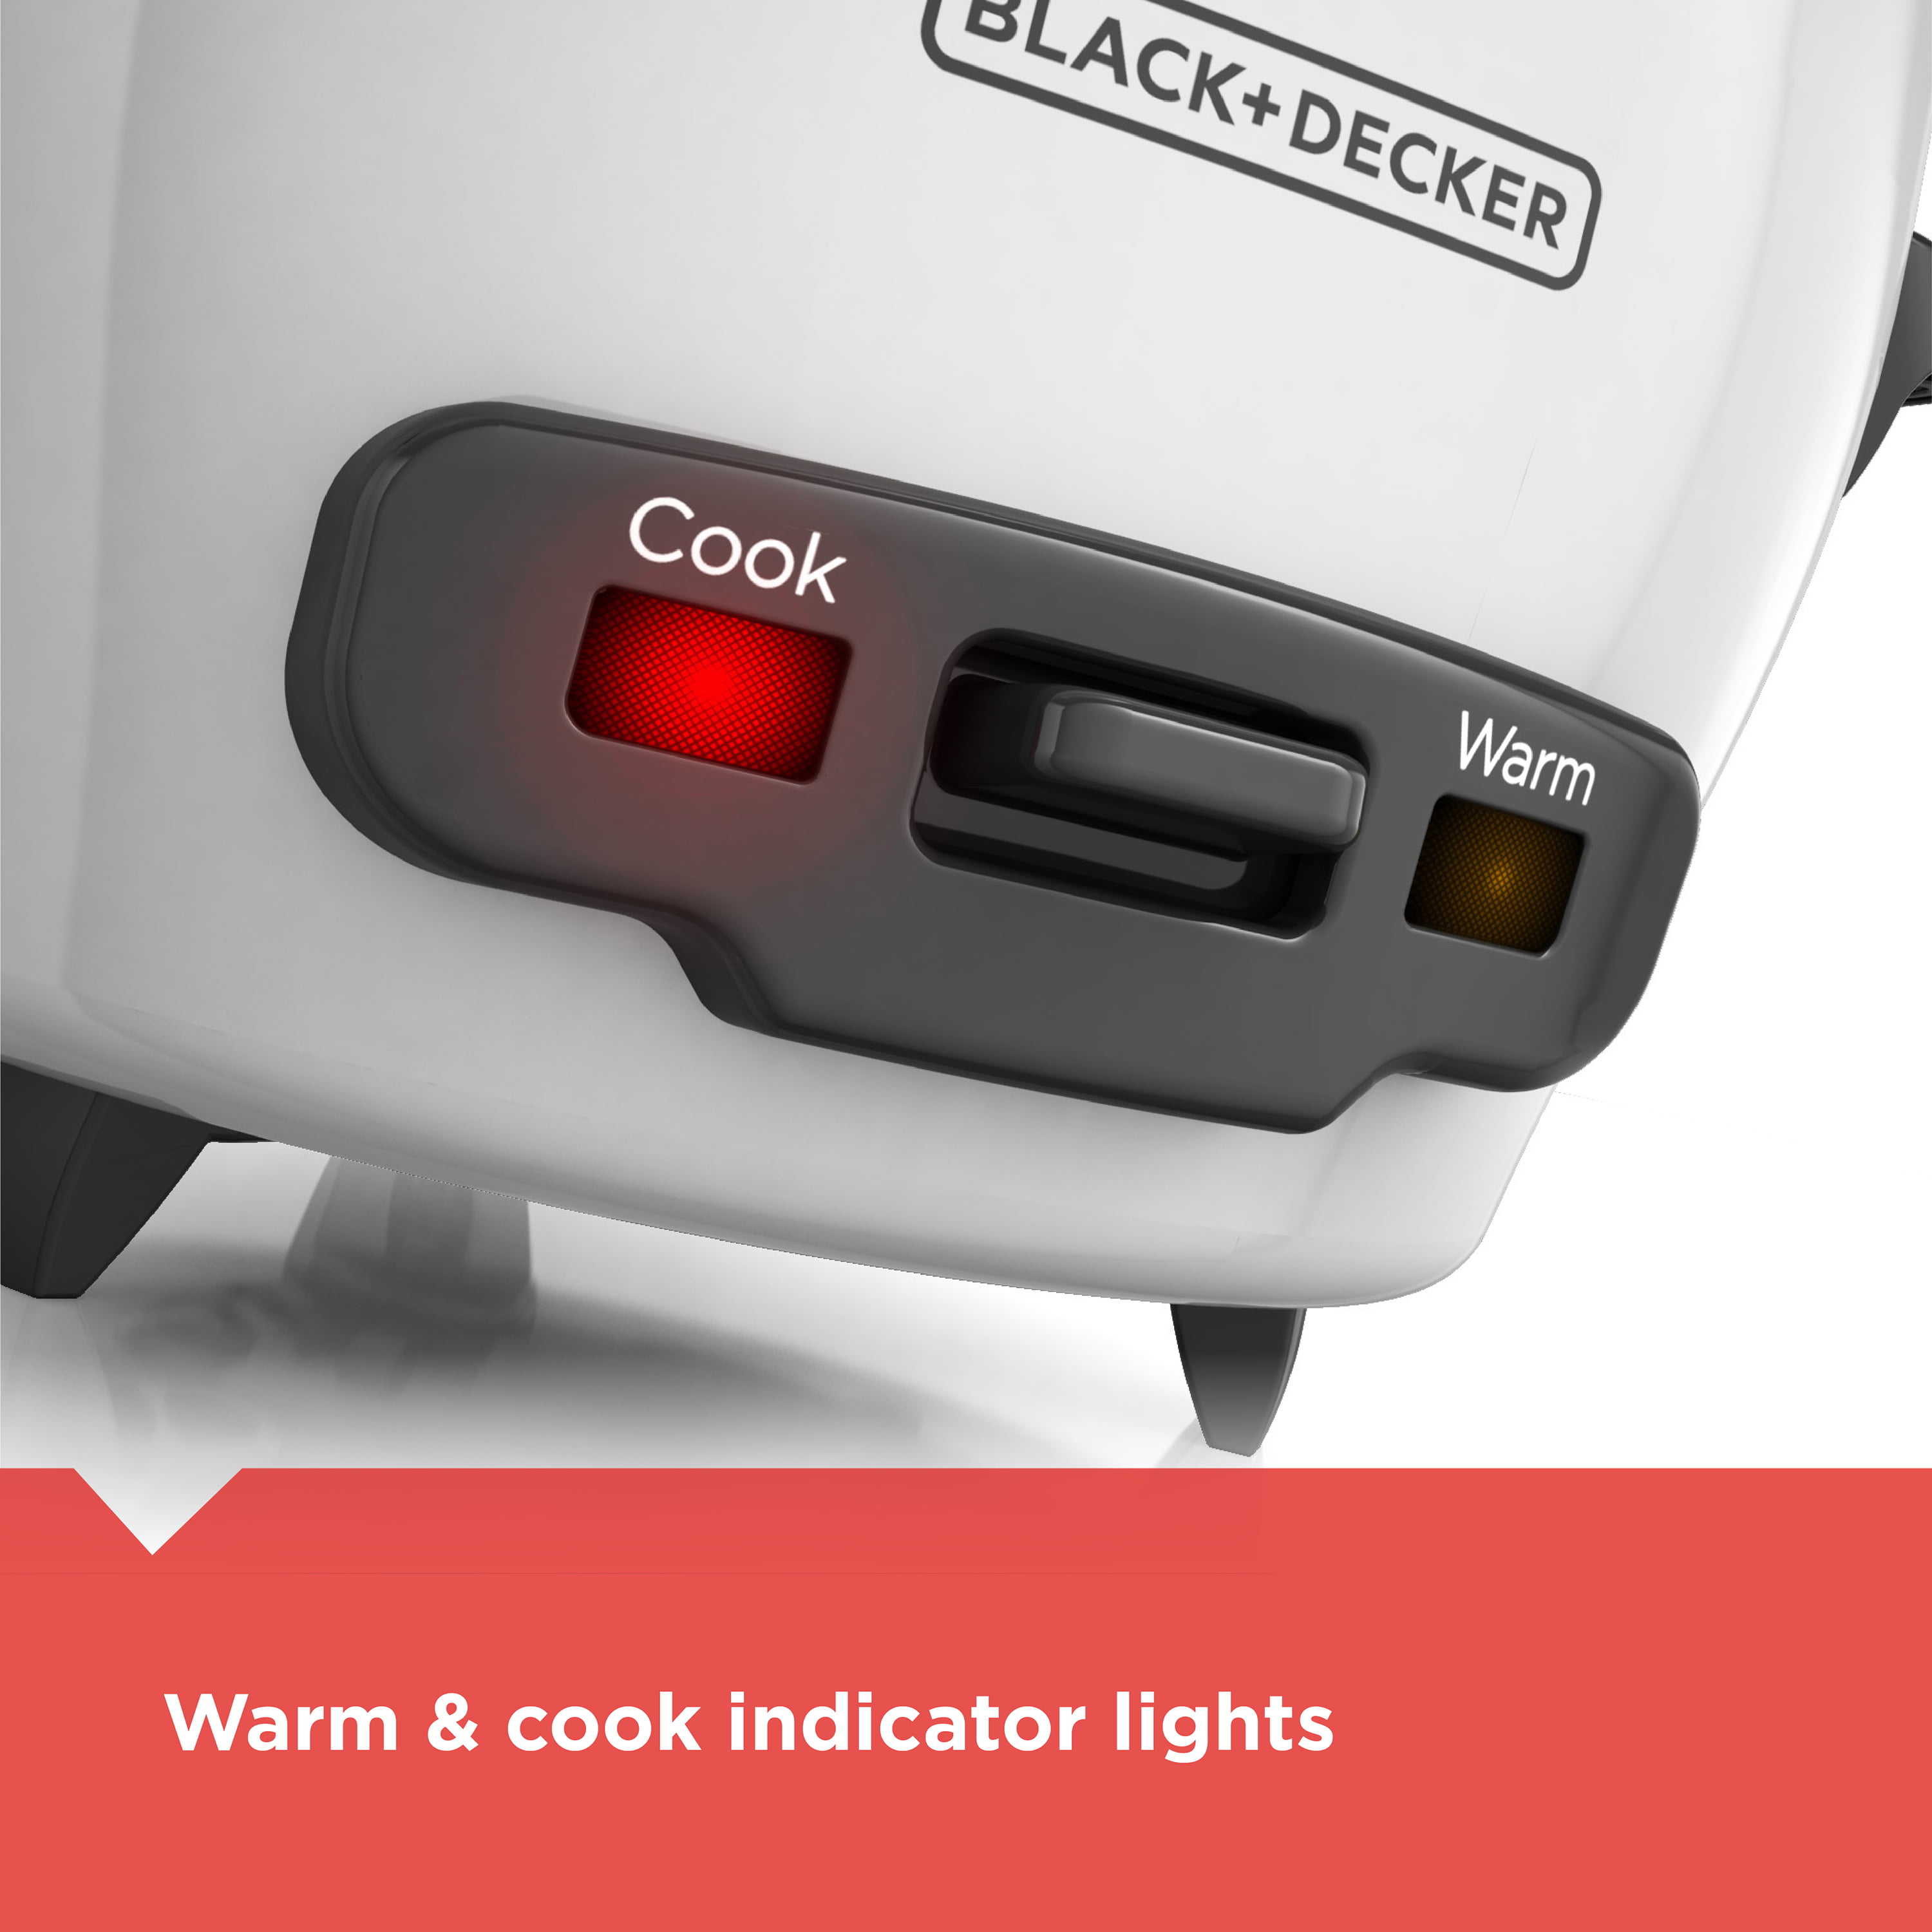 BLACK+DECKER Electric Rice Cooker with Keep-Warm Function